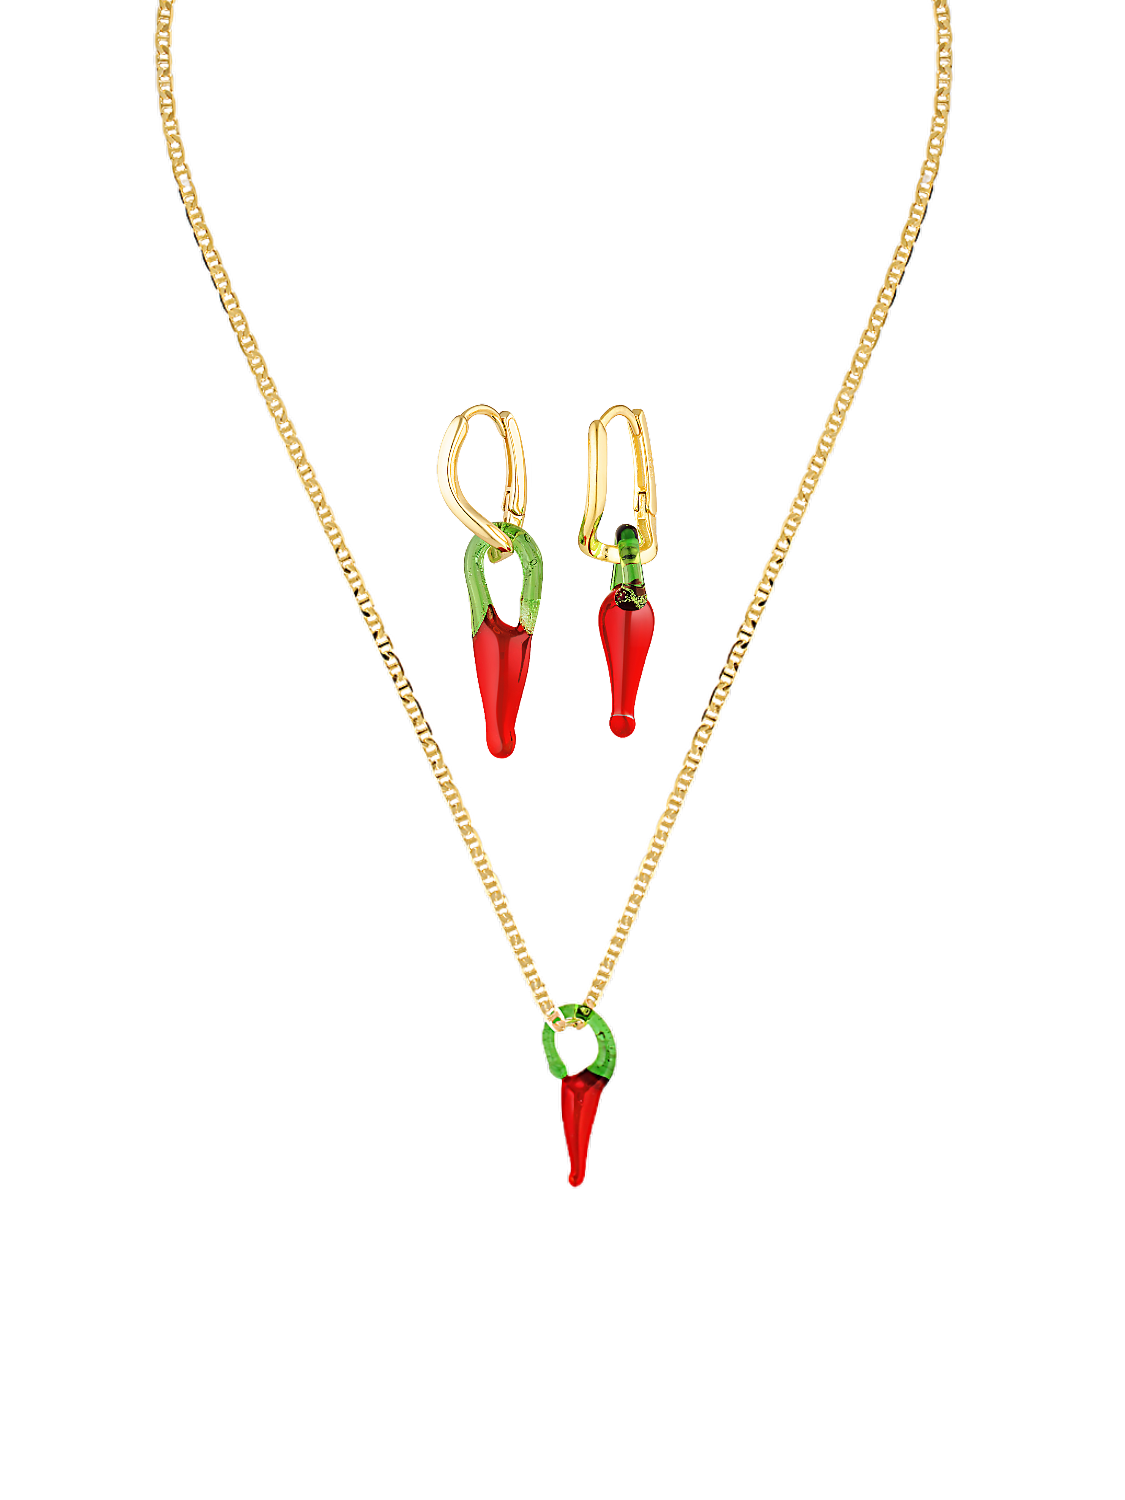 Beautiful 18k gold fill hoops and necklace with small glass chilli charms for good luck 